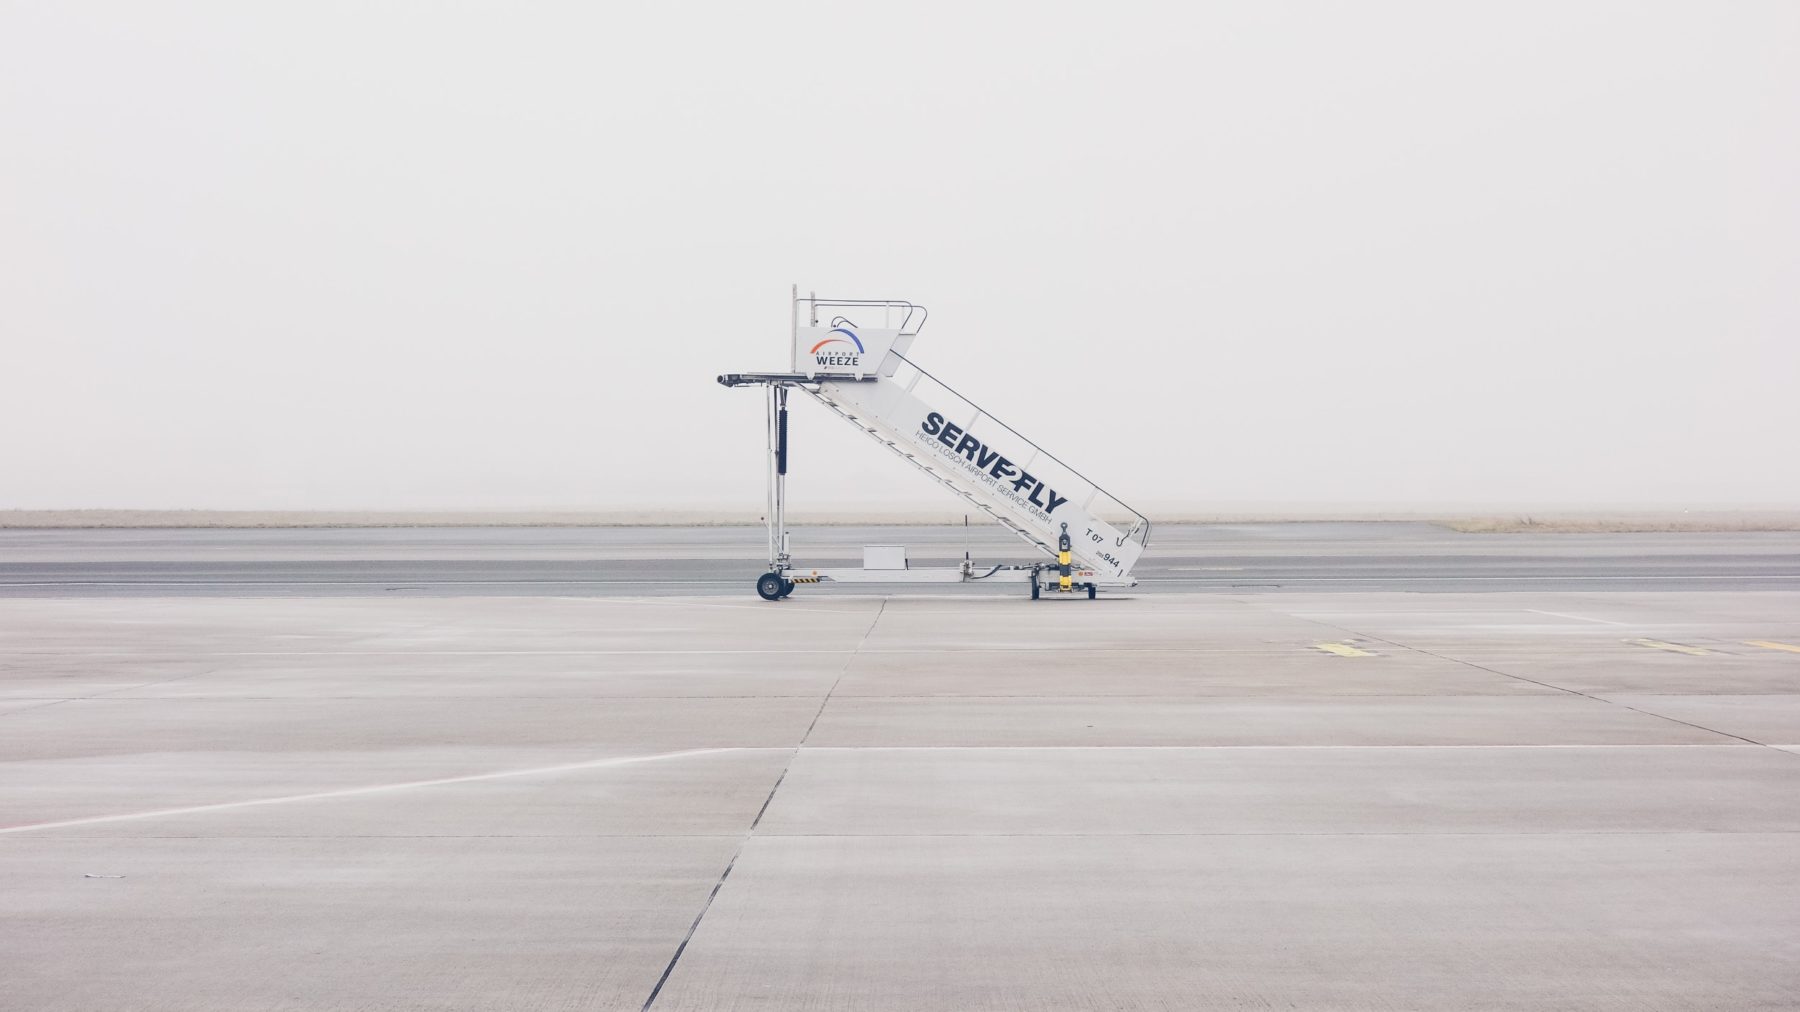 A deserted airport runway with a lone set of aircraft stairs on it.